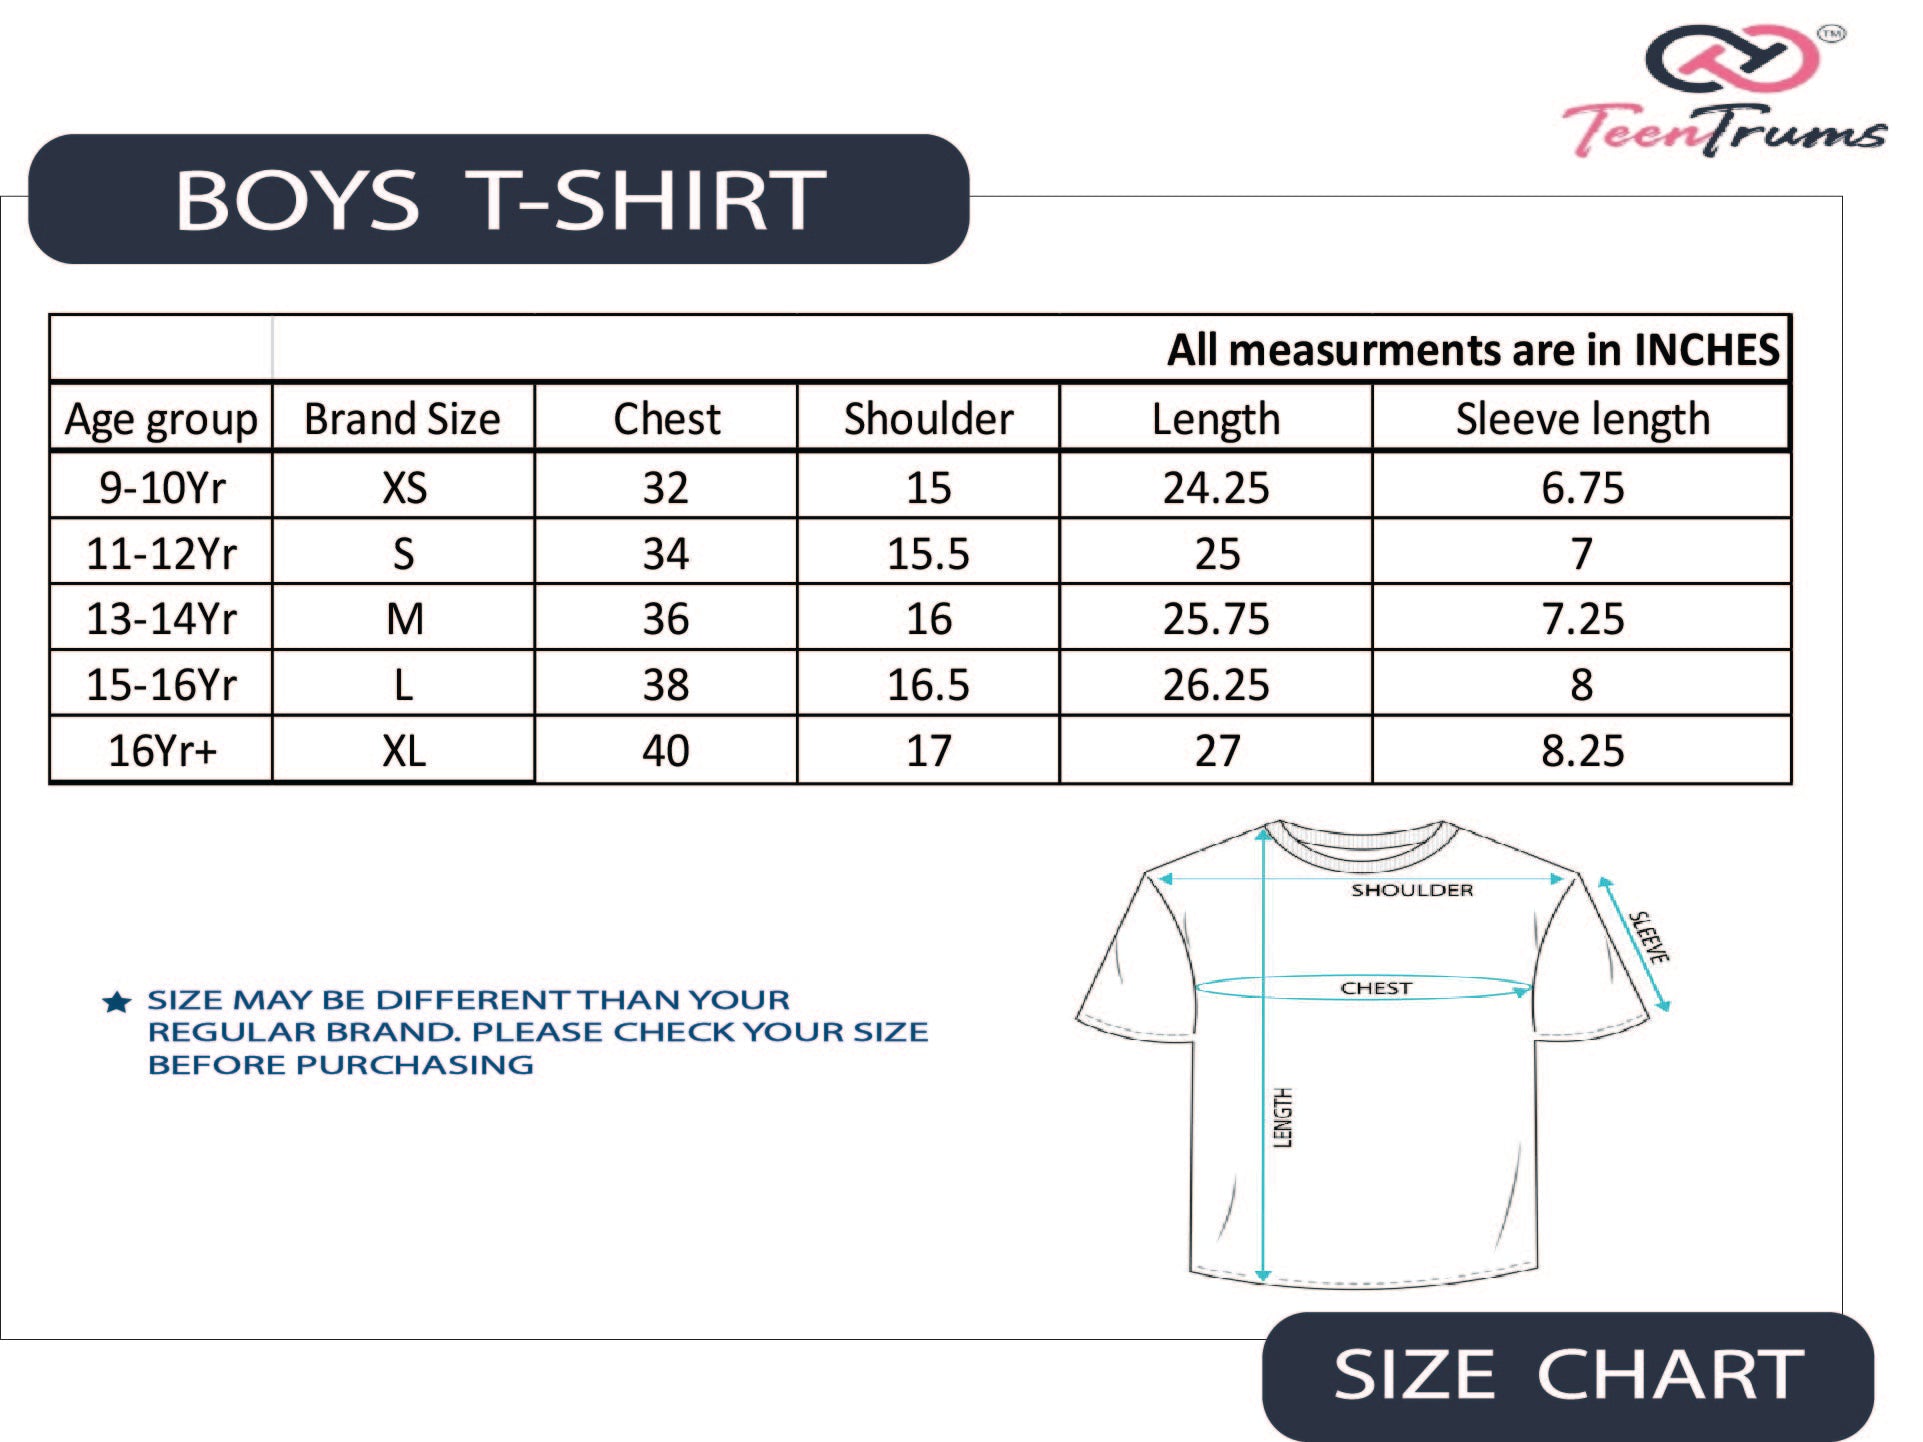 TeenTrums Pack of 3 100% Cotton Cool Graphic Printed T-Shirt for Boys - Black/ White / Navy